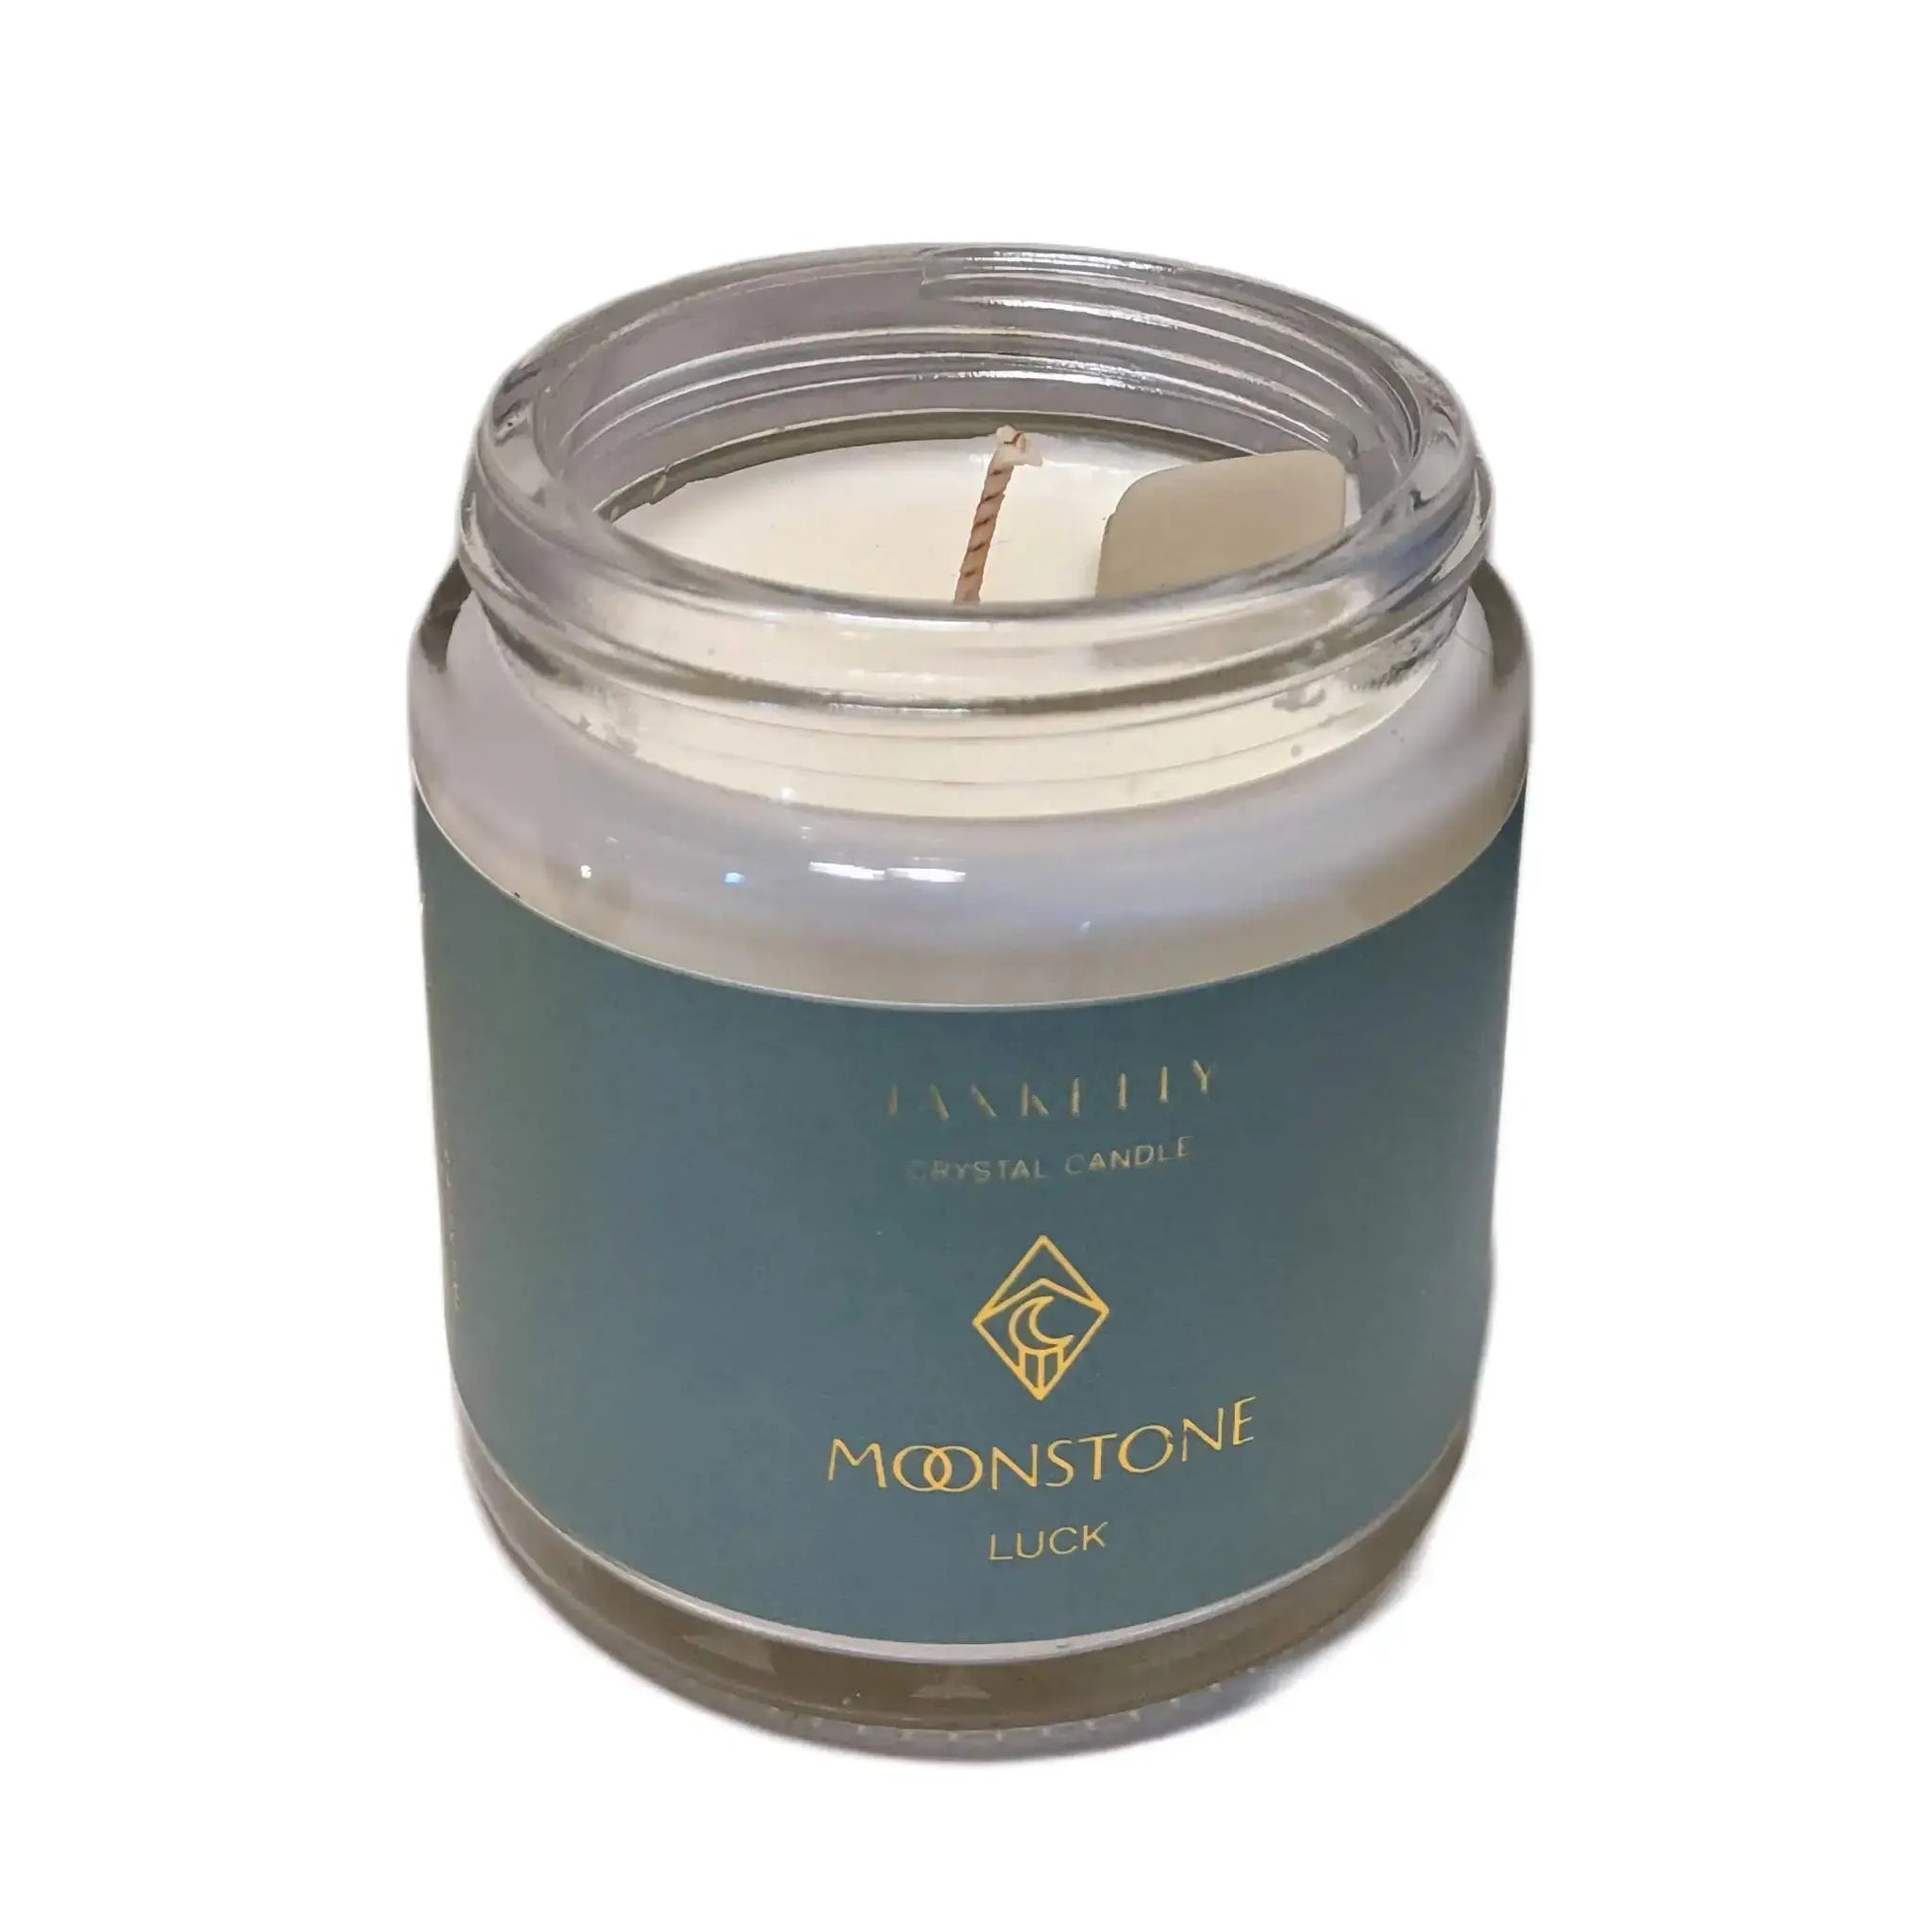 earthy scented soy intention candle with crystal